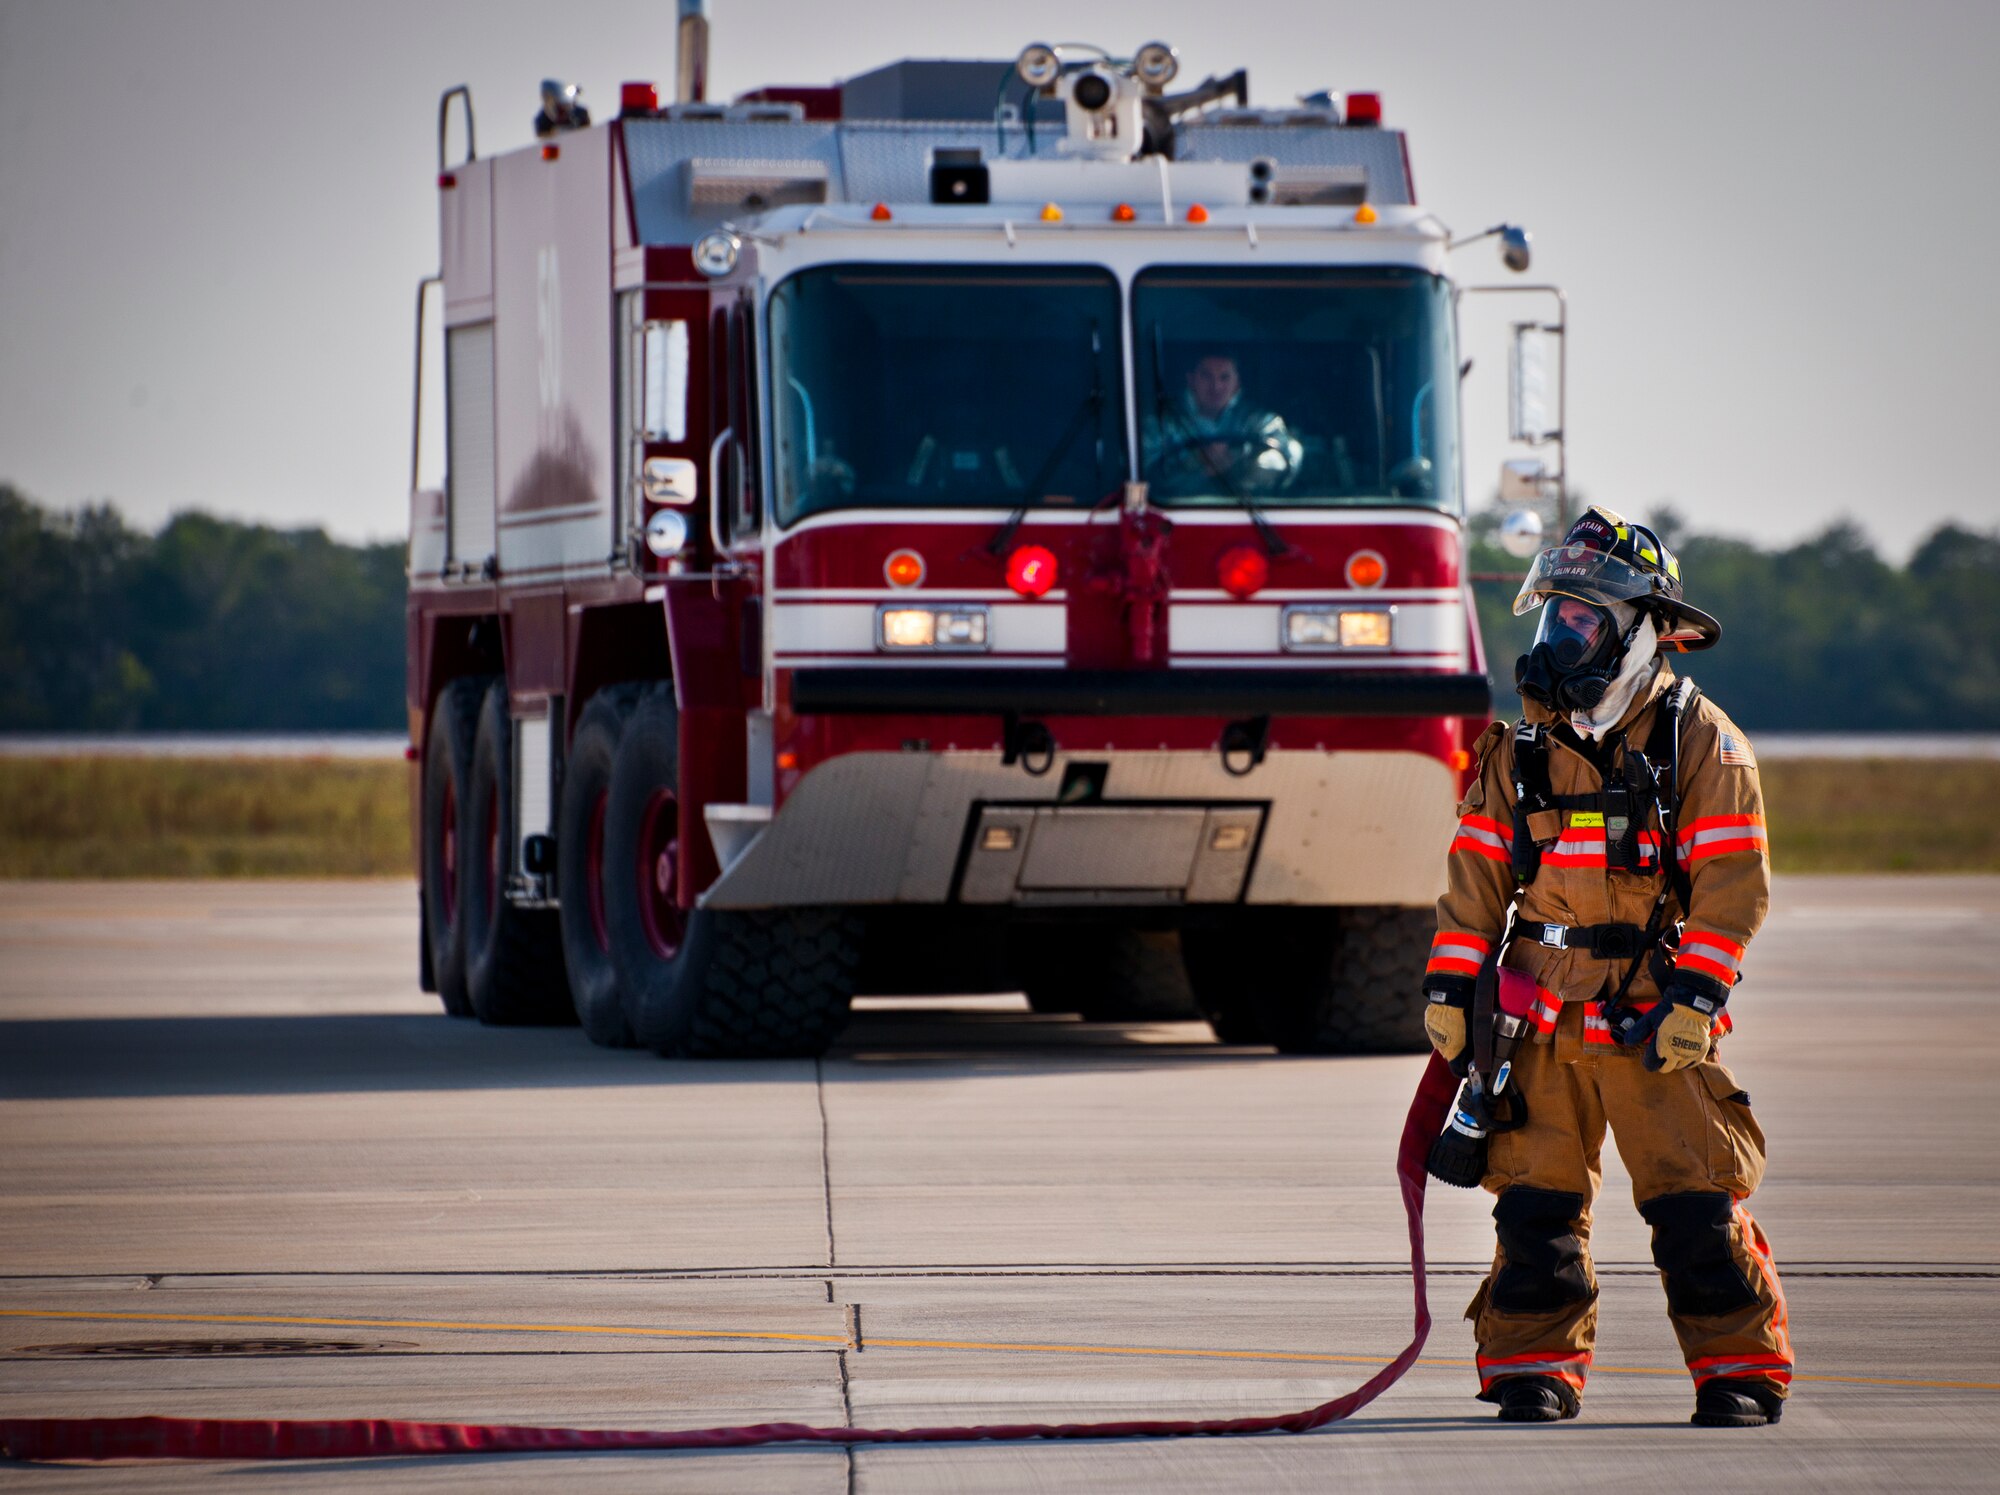 An Eglin Air Force Base firefighter stands by to engage the fire from an F-35 Lightning II during a major accident response exercise May 9.  This was the first MARE involving the Air Force’s newest fighter aircraft at Eglin.  First responders had to put out fires on debris from the aircraft after a hard landing.  They also had to extract the injured pilot and get him to medical personnel.  (U.S. Air Force photo/Samuel King Jr.)